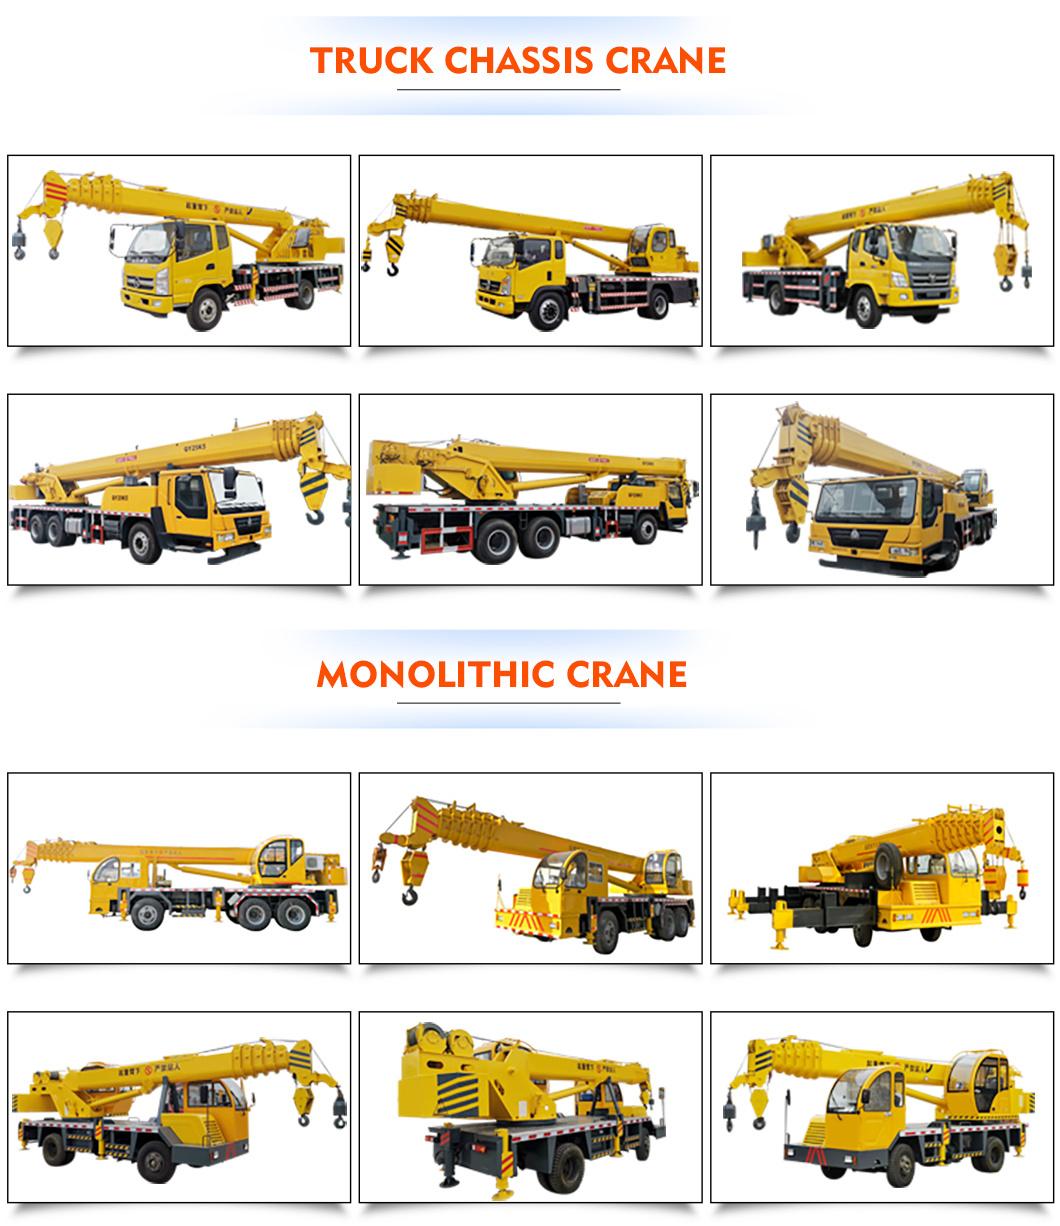 Fuel Saving Hydraulic Proportional Control System Best Types of Cranes 20t Mobile Crane